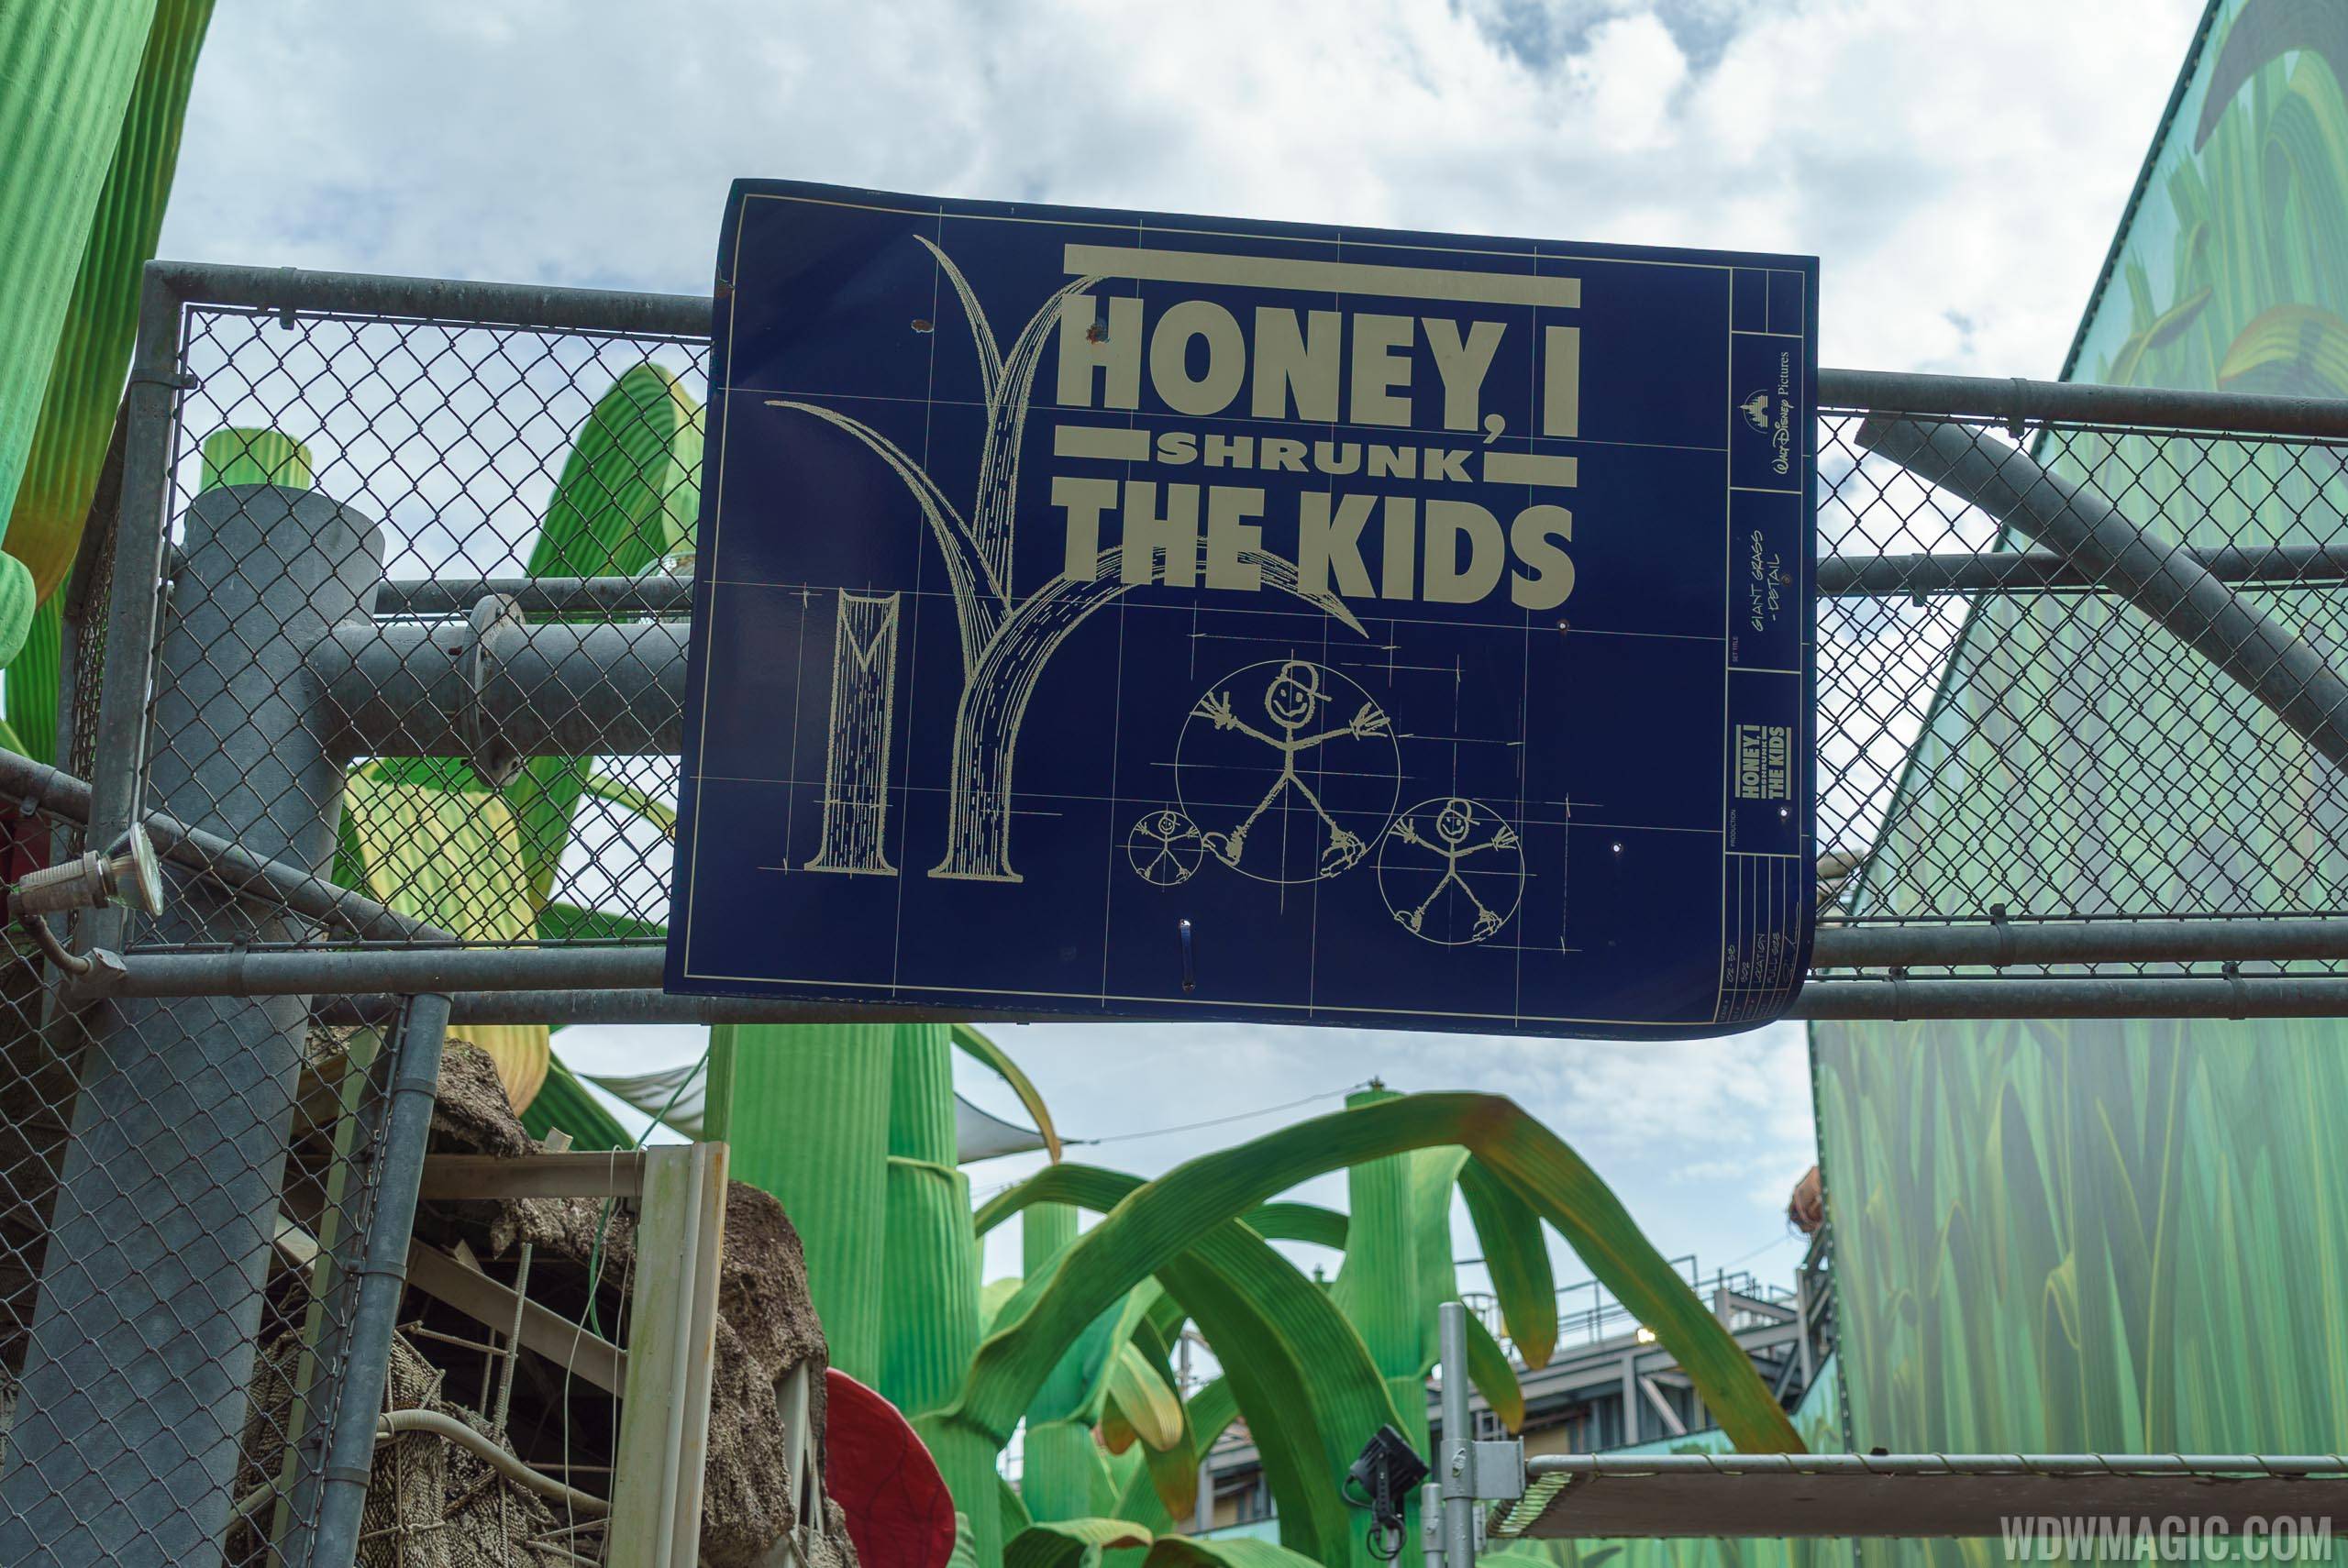 Honey, I Shrunk the Kids playground closing for a second scheduled refurbishment 